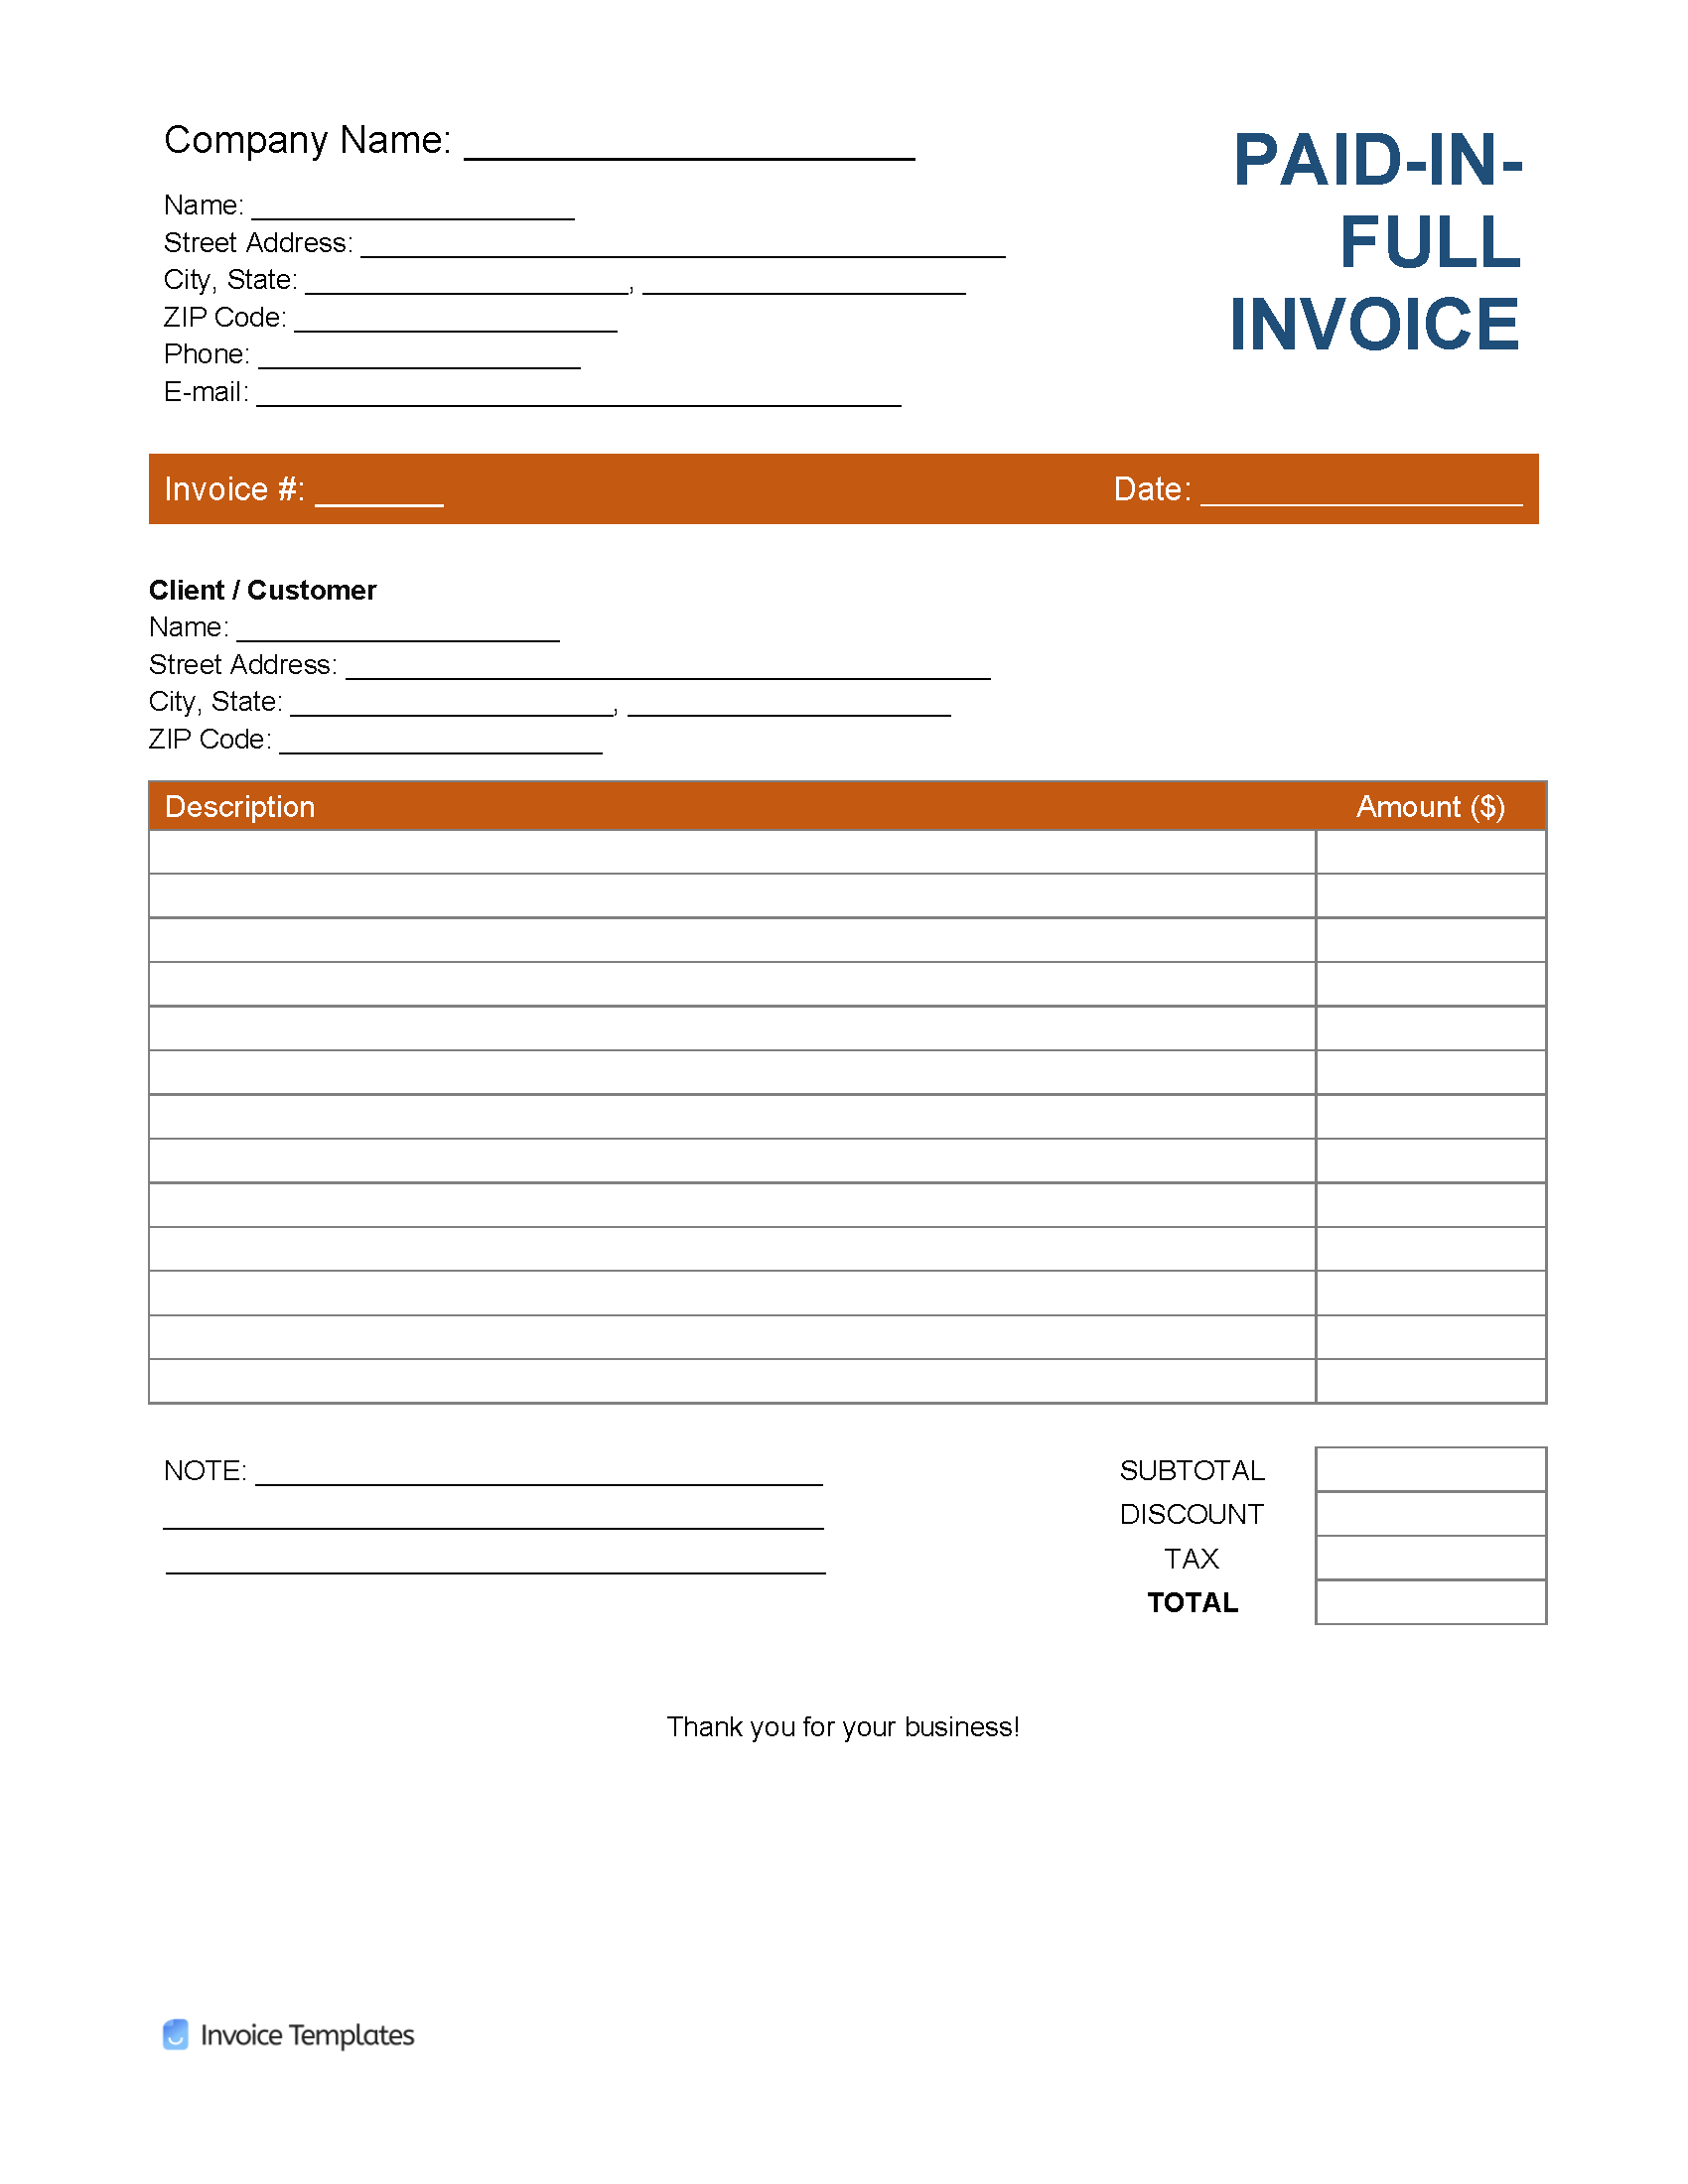 Free Paid In Full Invoice Template Pdf Word Excel